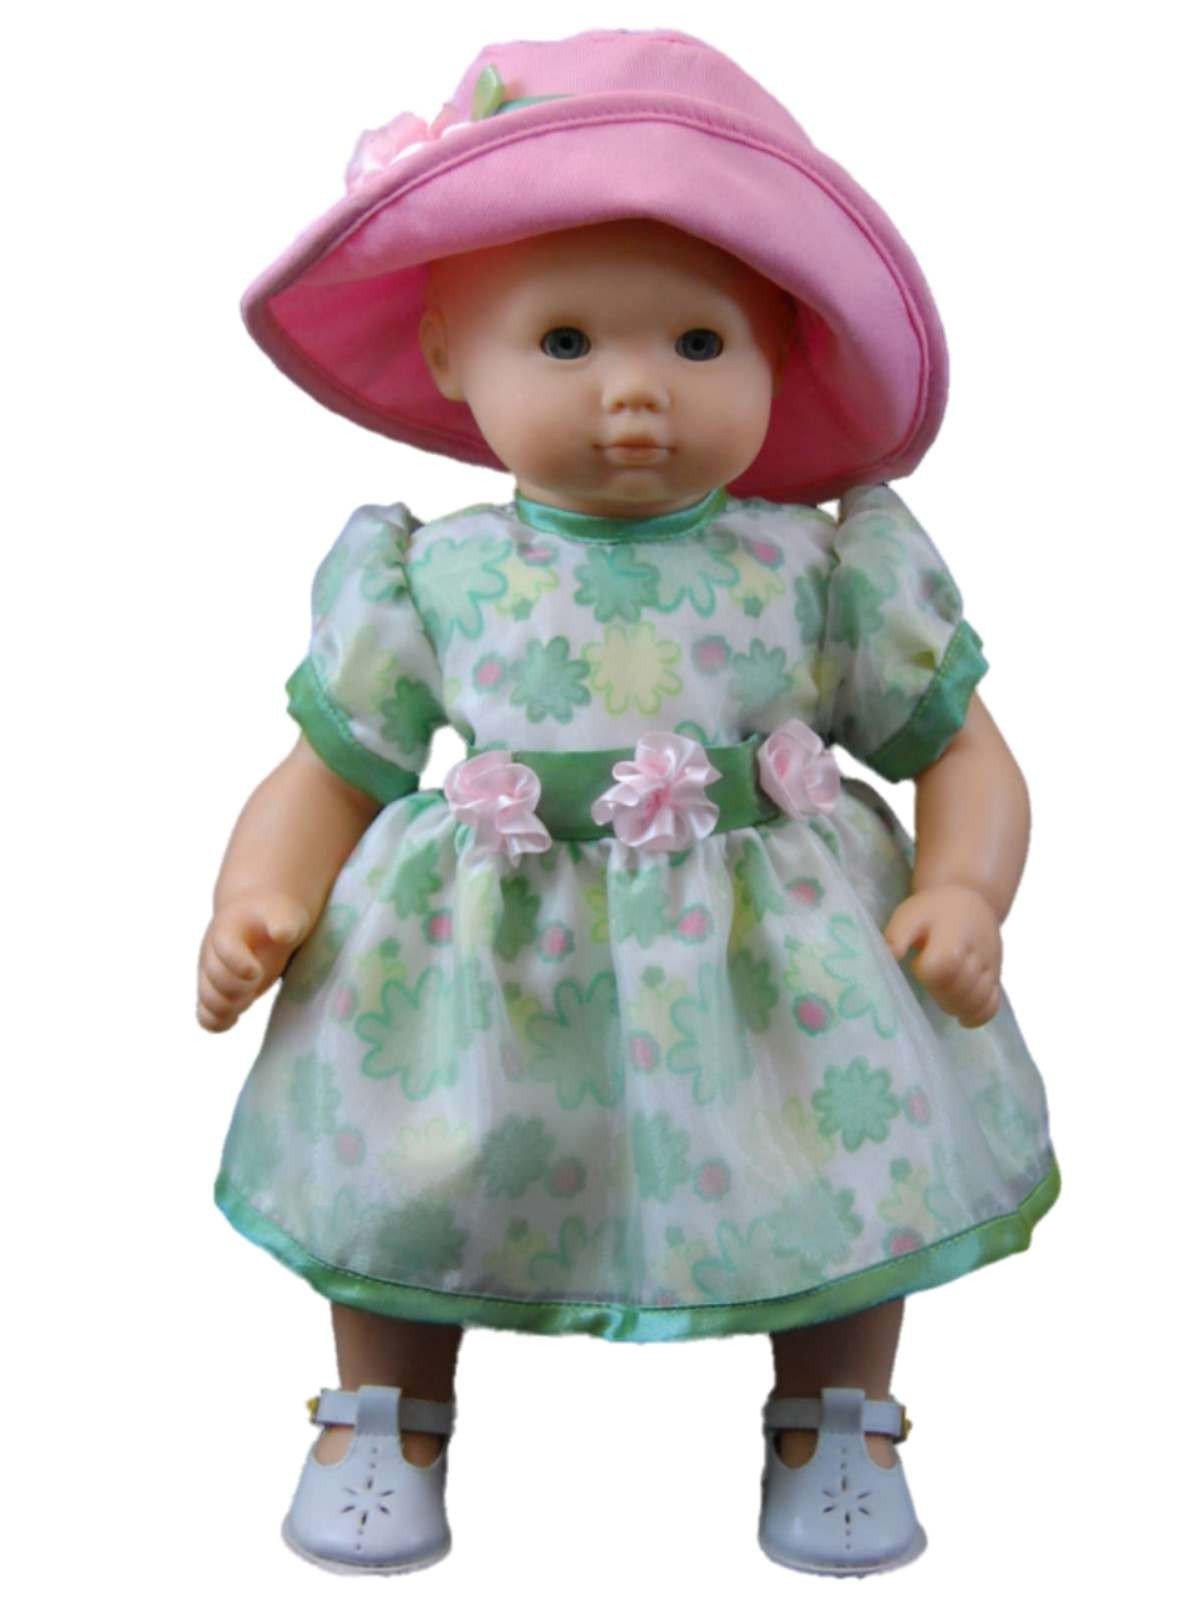 Pretty Floral Dress For 15" American Girl Bitty Baby¨ Doll Clothes